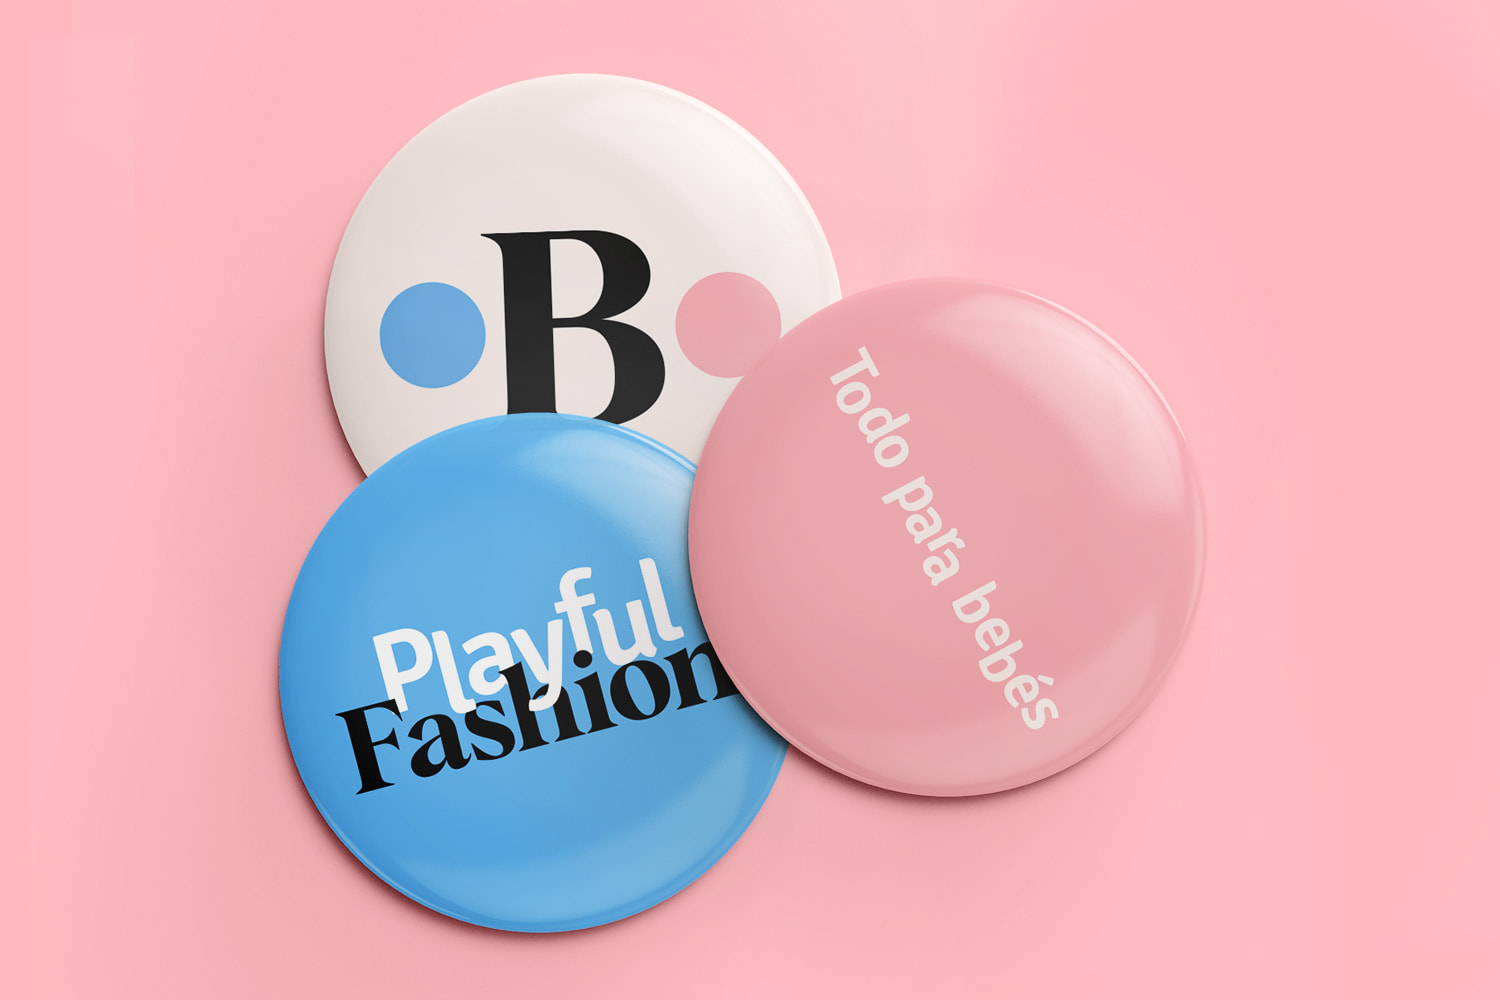 Three Babymania button designs: one with logo icon, one blue one with a phrase, and one pink one with the brand slogan